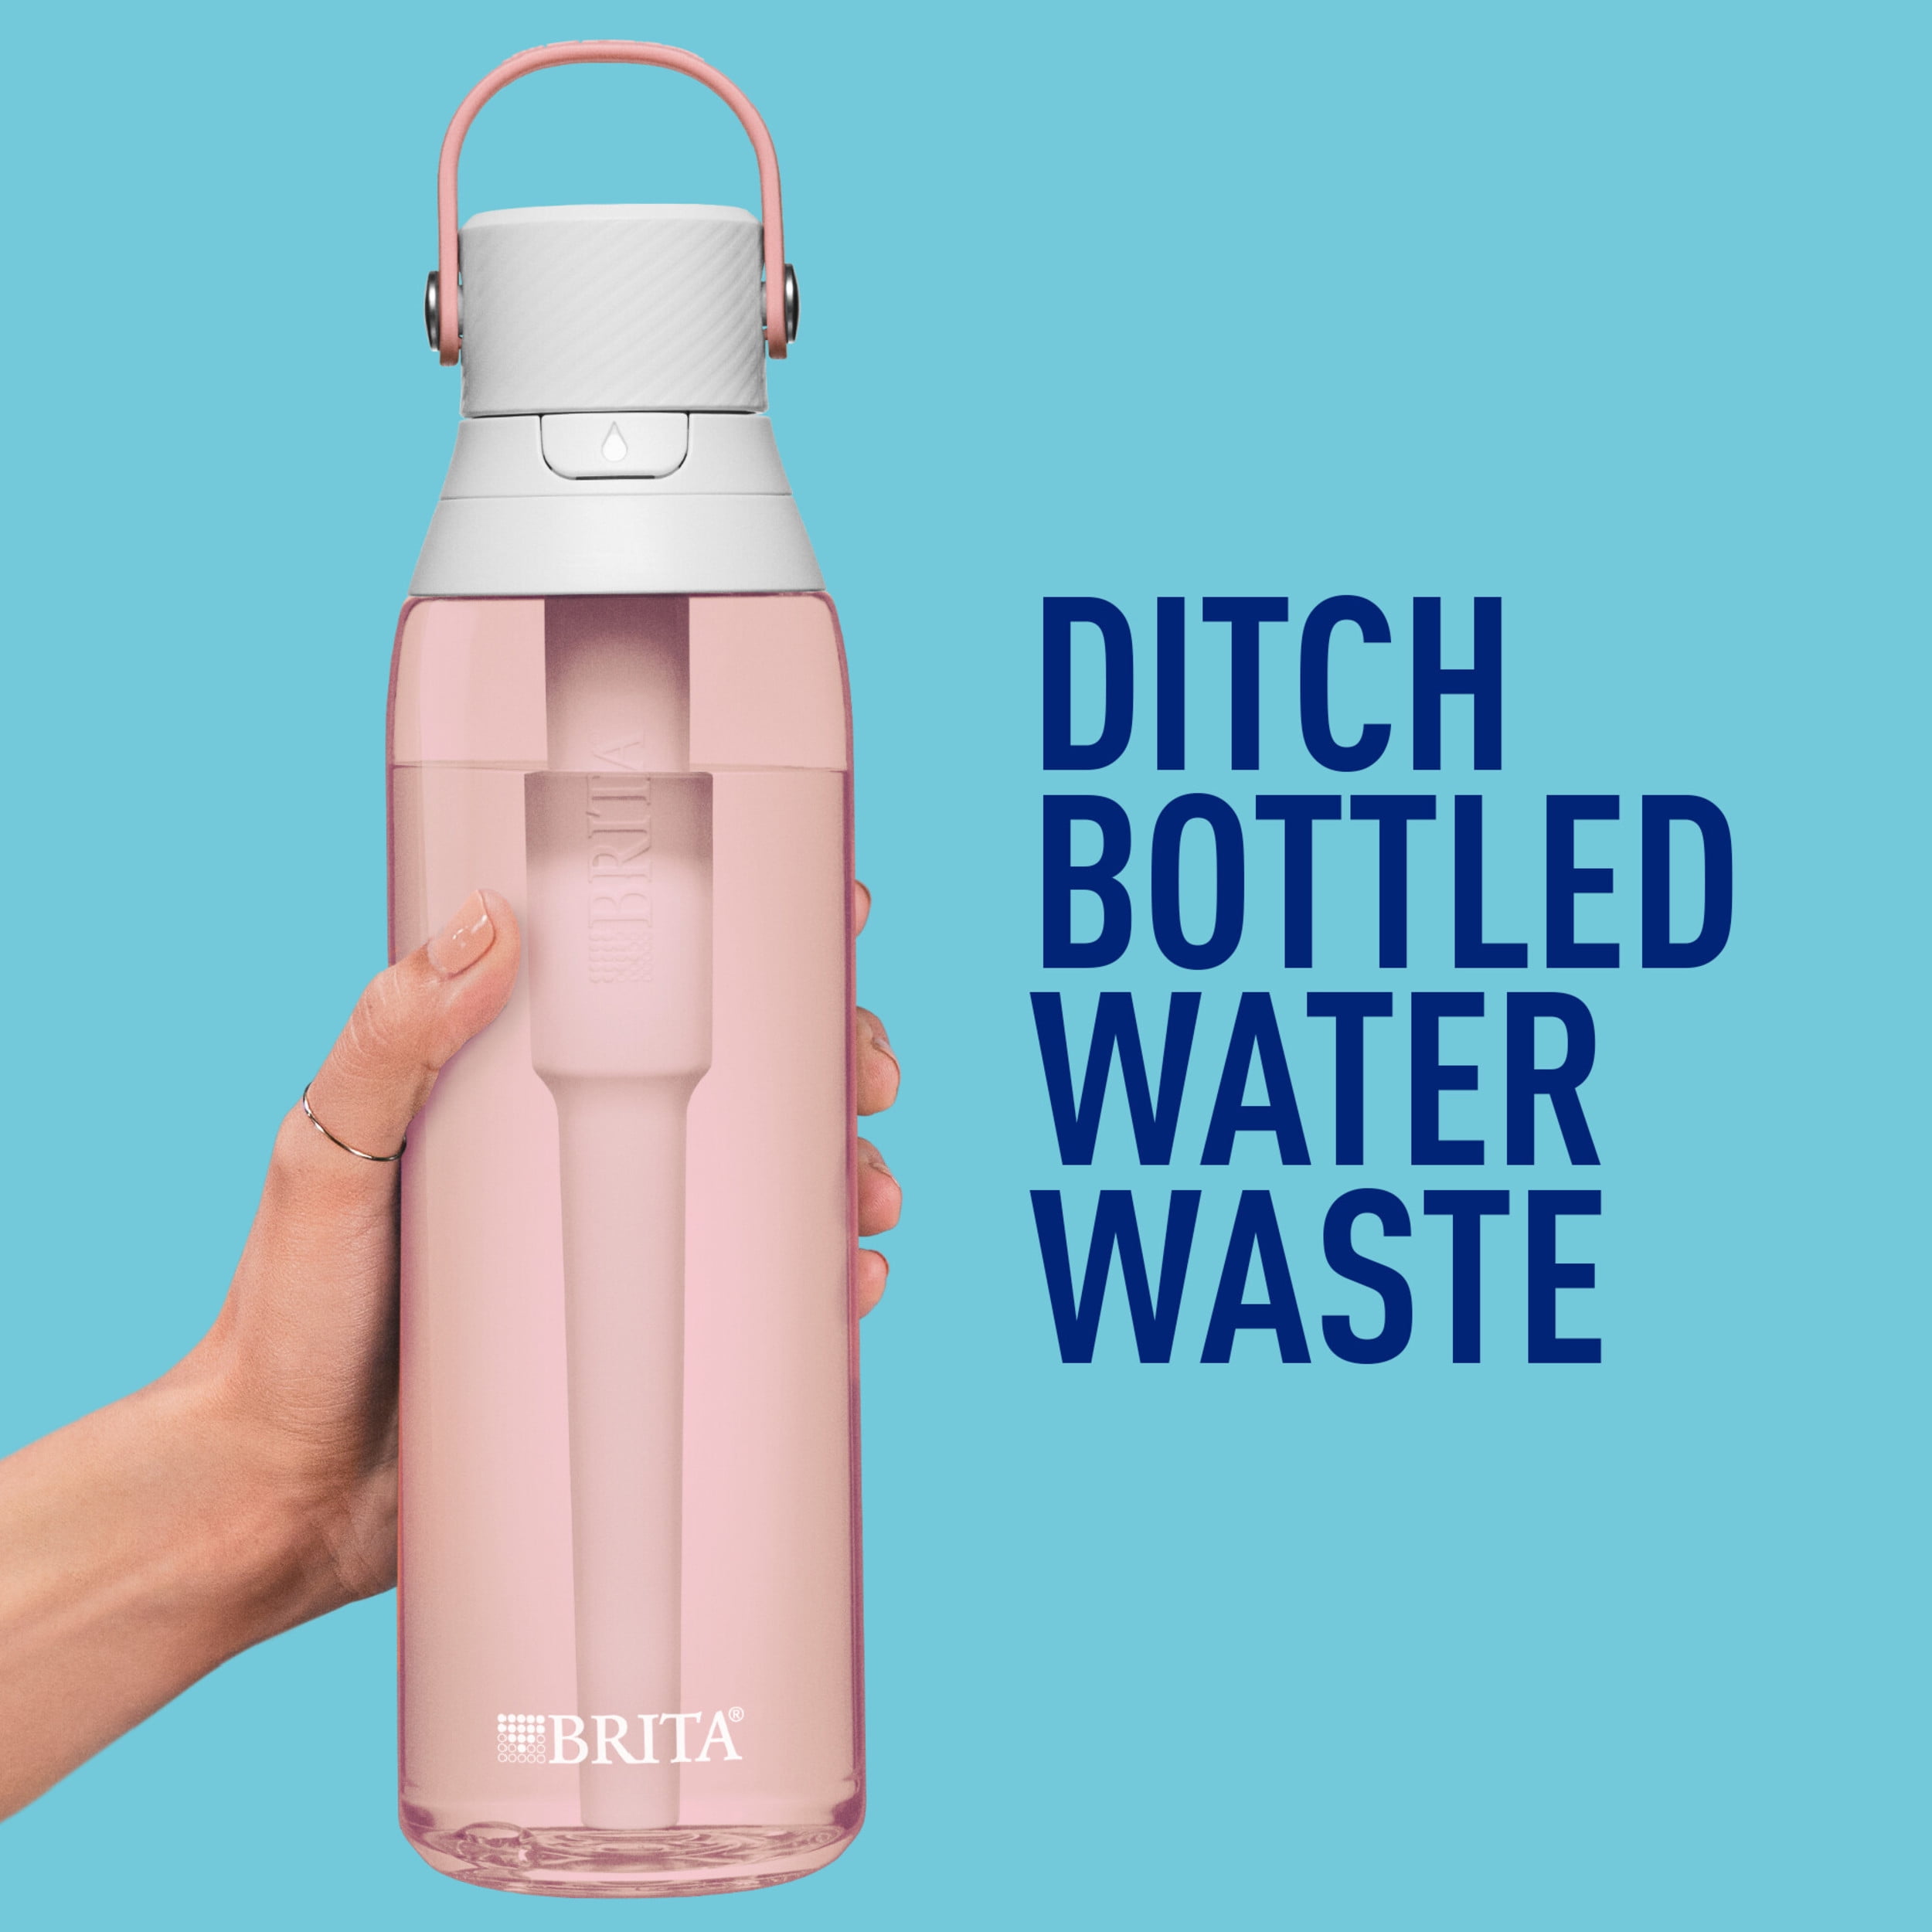 Brita Premium Filtered Water Bottle with 3 Pack Filters - 26 Ounce, BP –  Solace Pharmacy & Wellness Shop